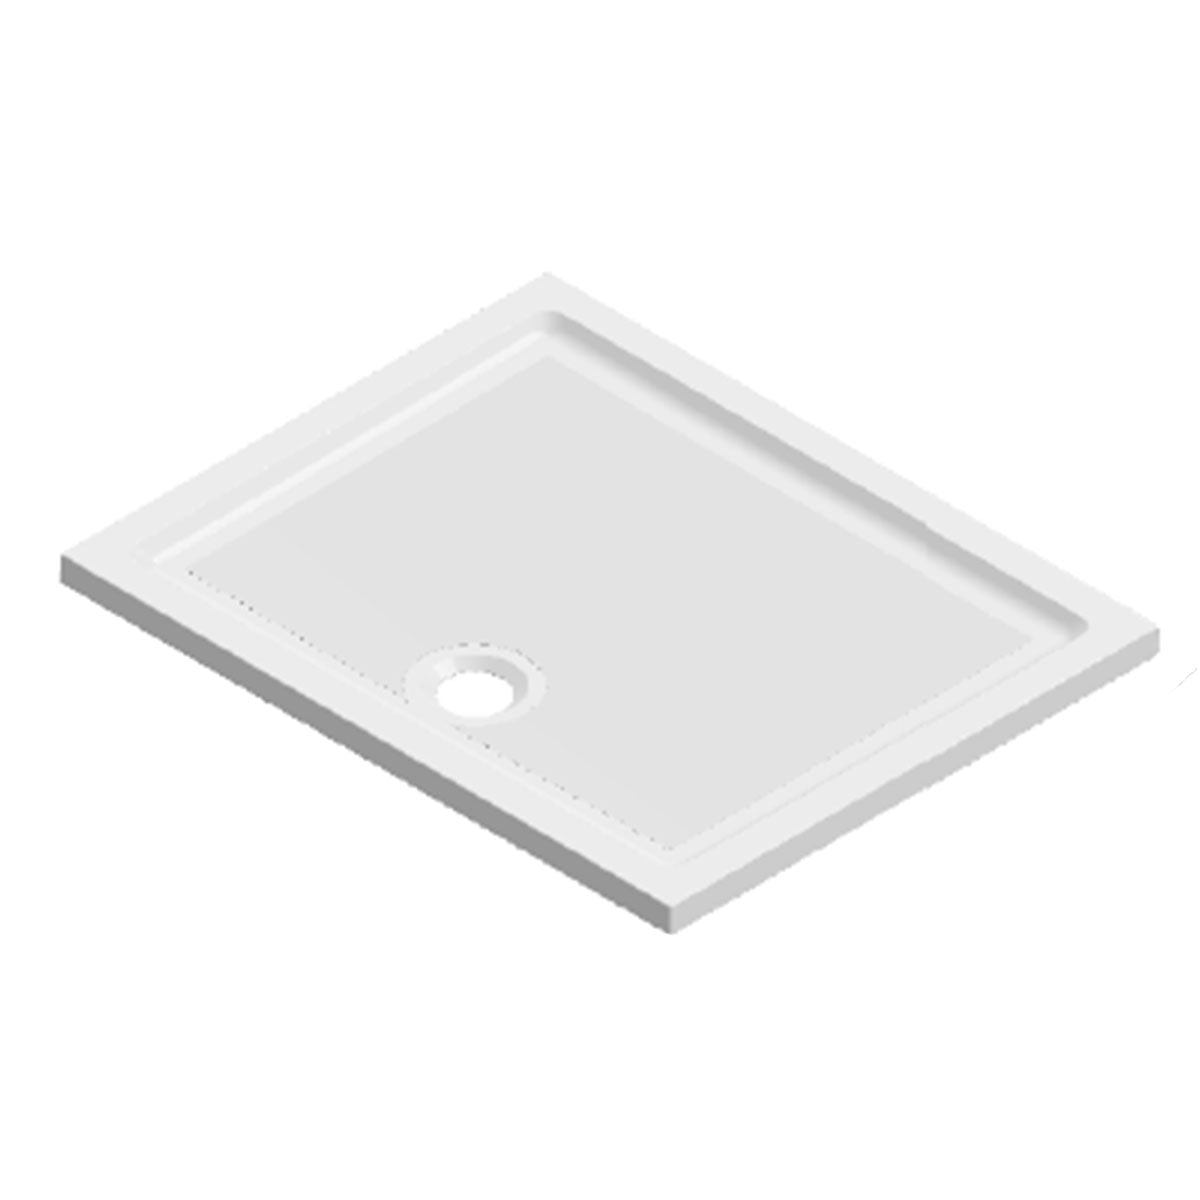 iTray Slip Resistant Low Profile Shower Tray - Rectangular